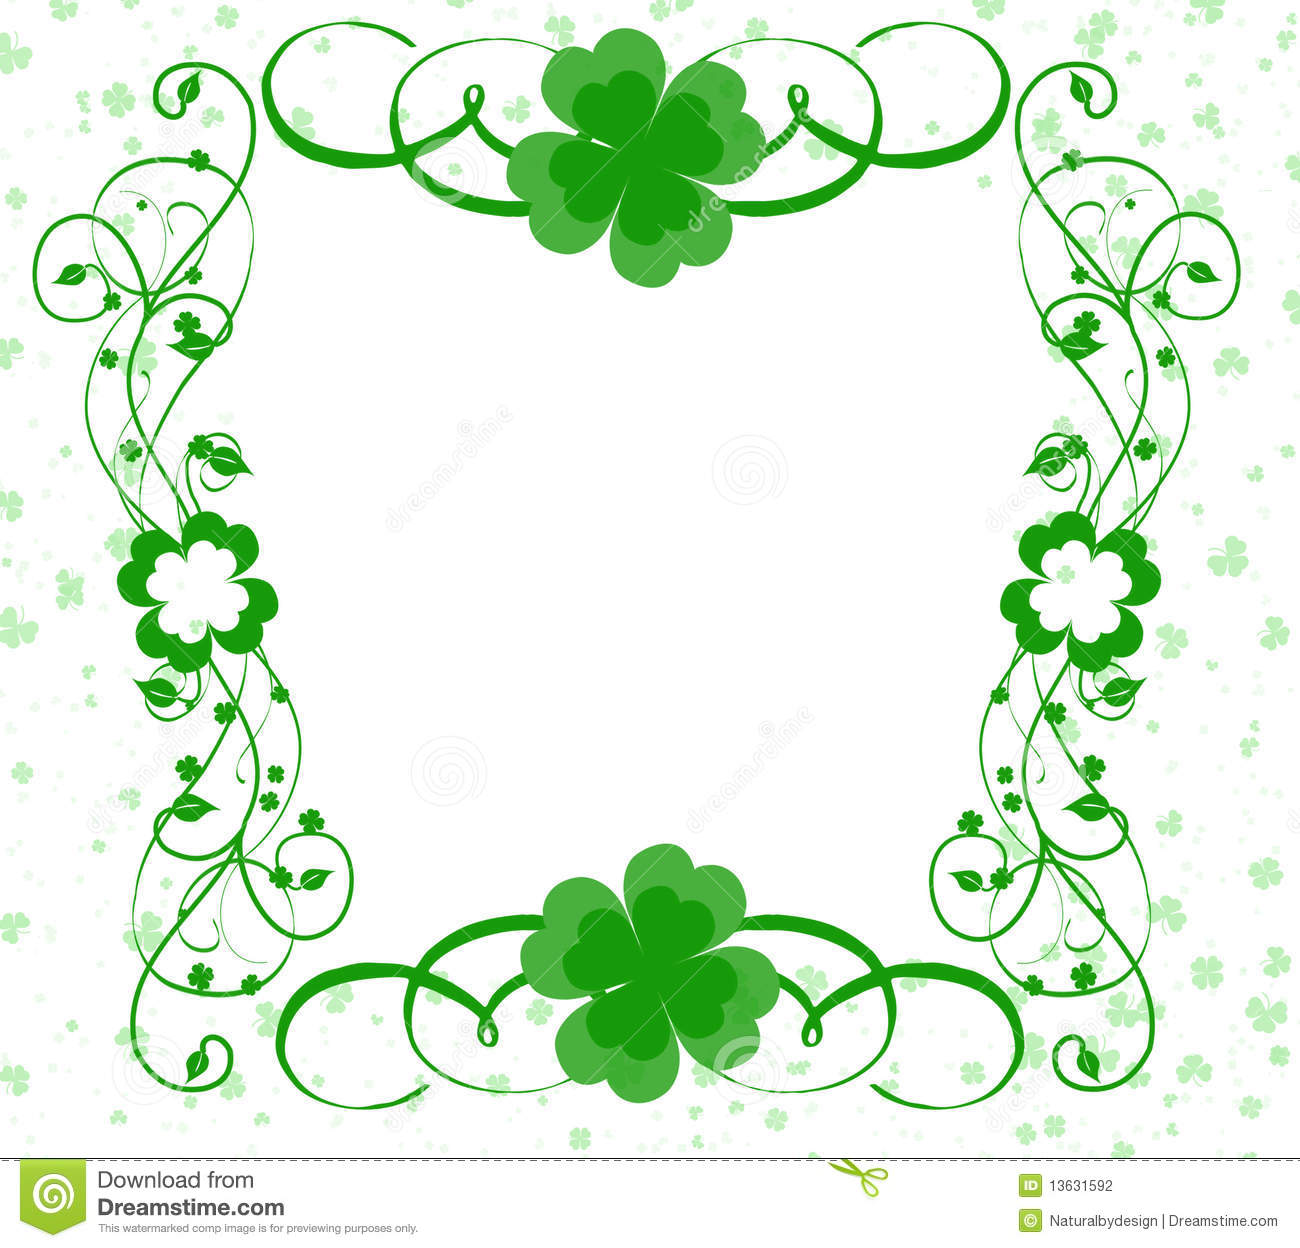 Good Luck Border With Lucky Four Leaf Clovers And Swirls In Vector